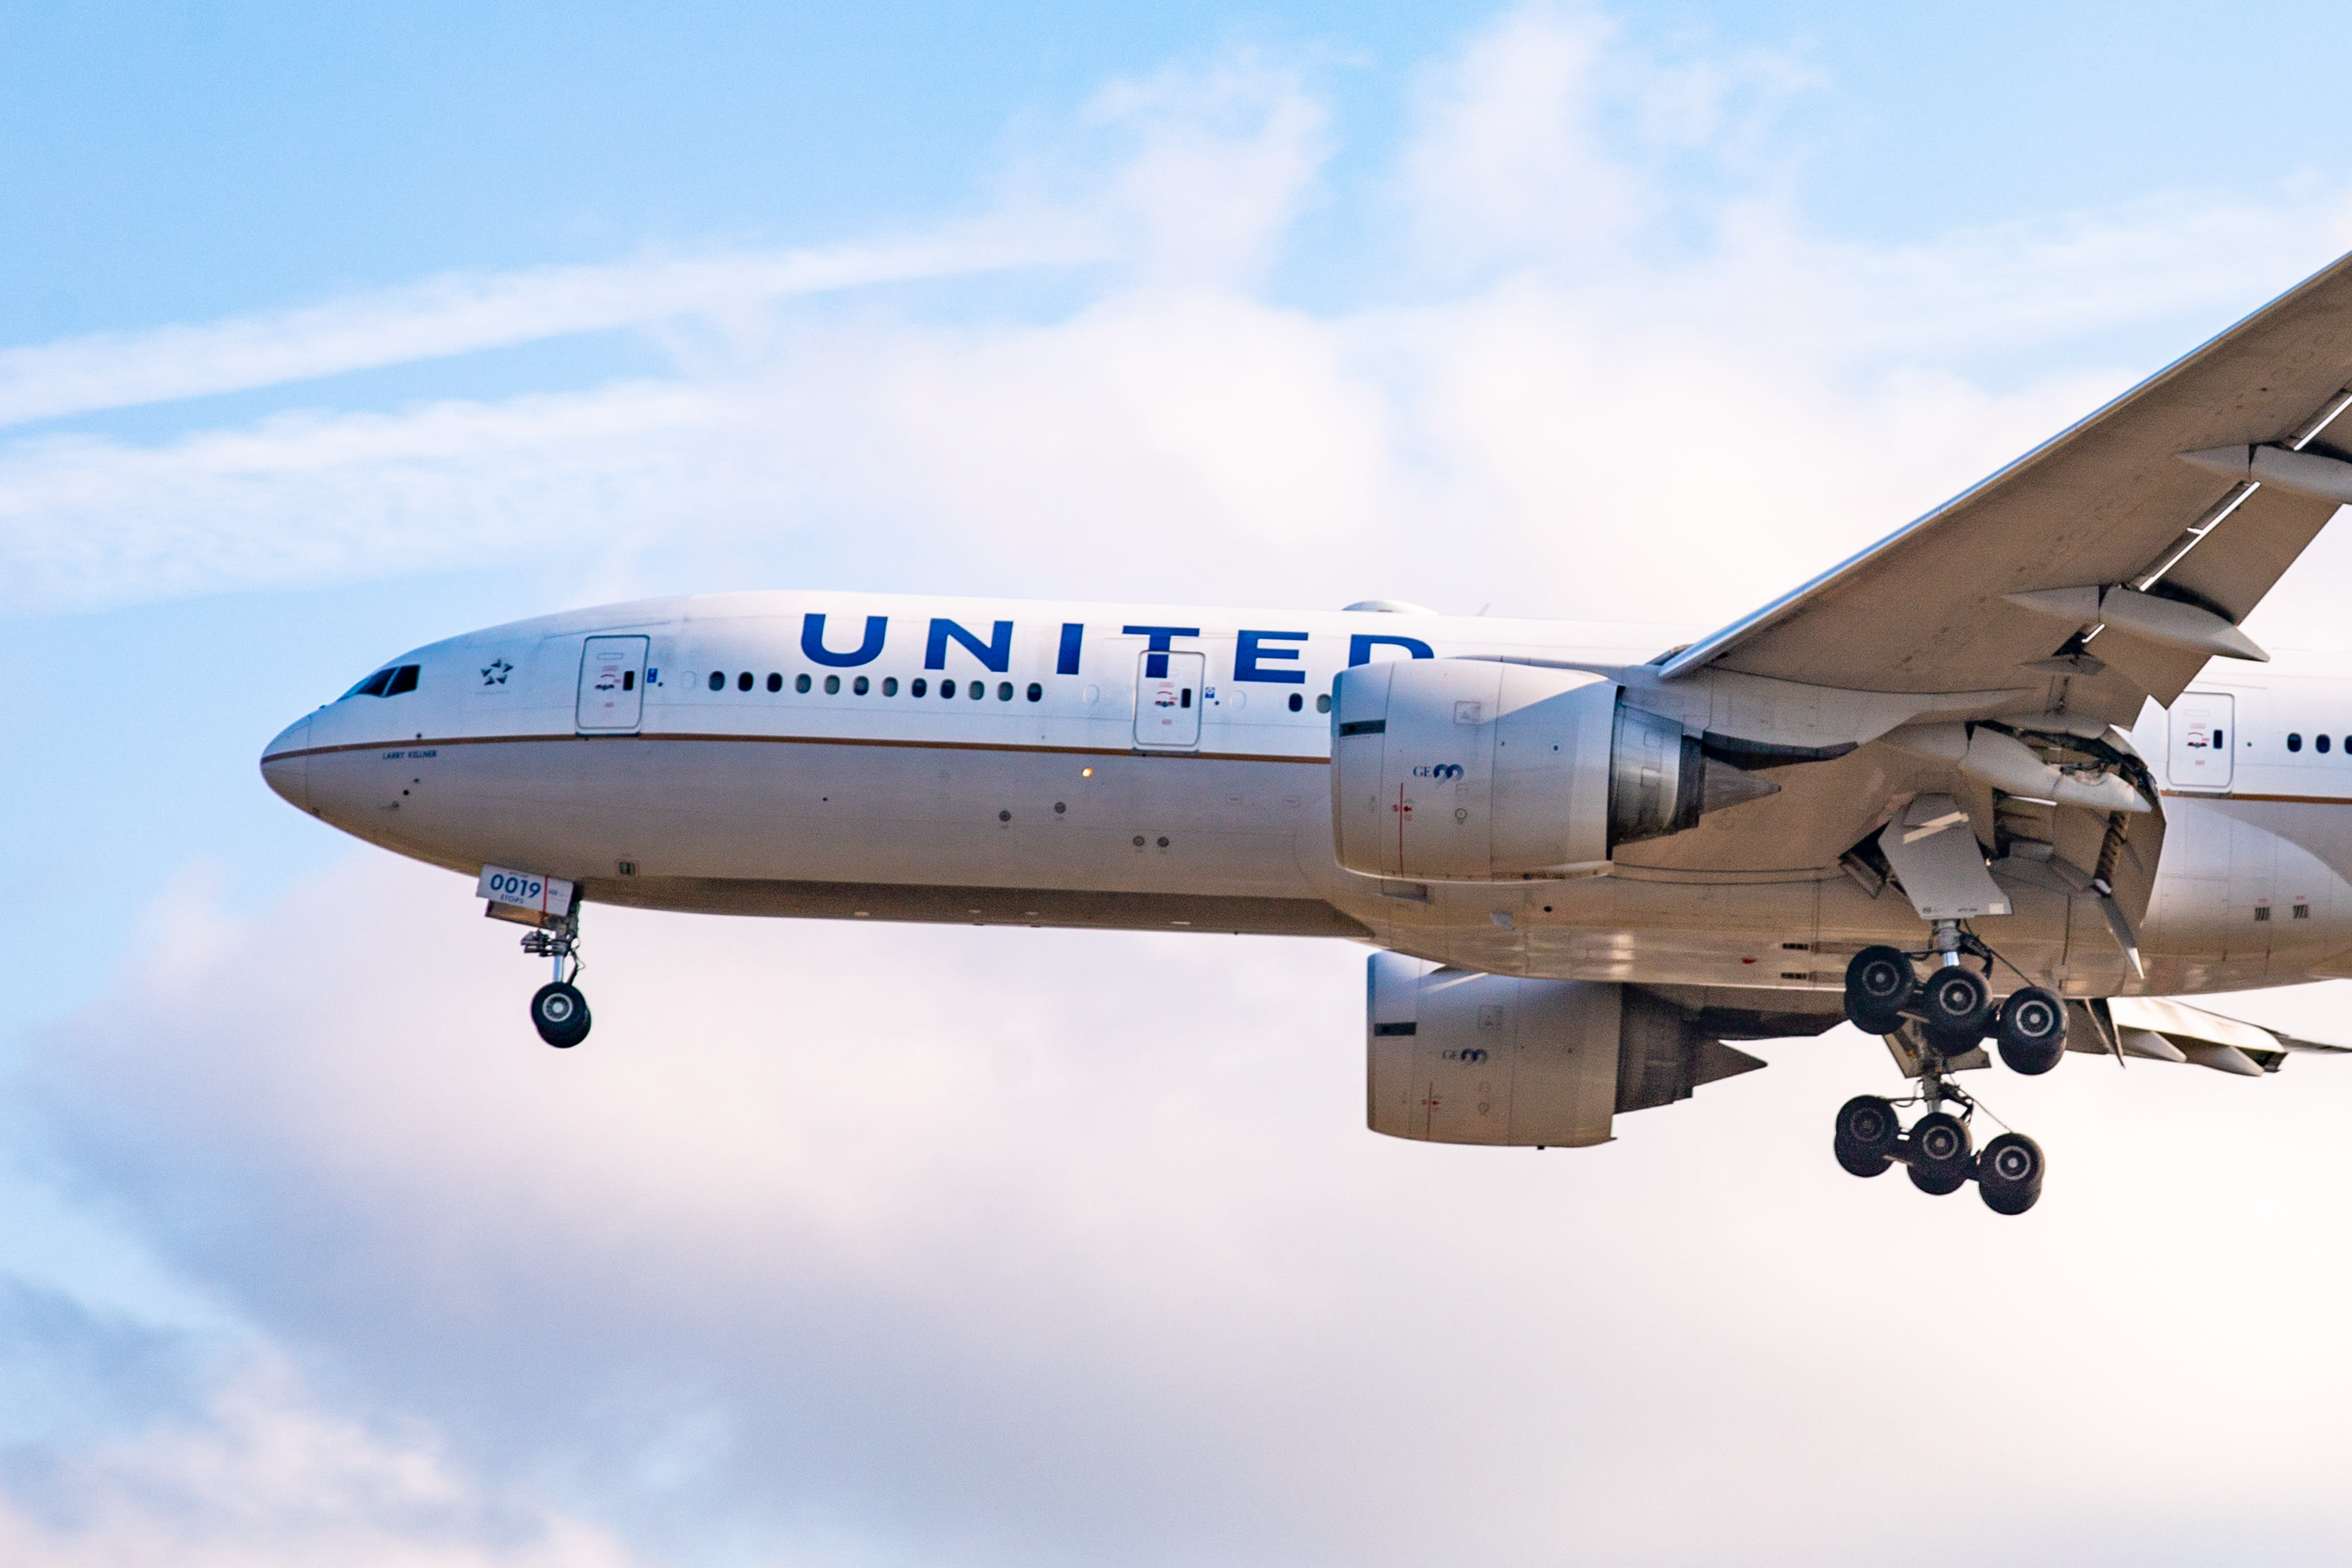 United Airlines frequent flyer miles will no longer expire